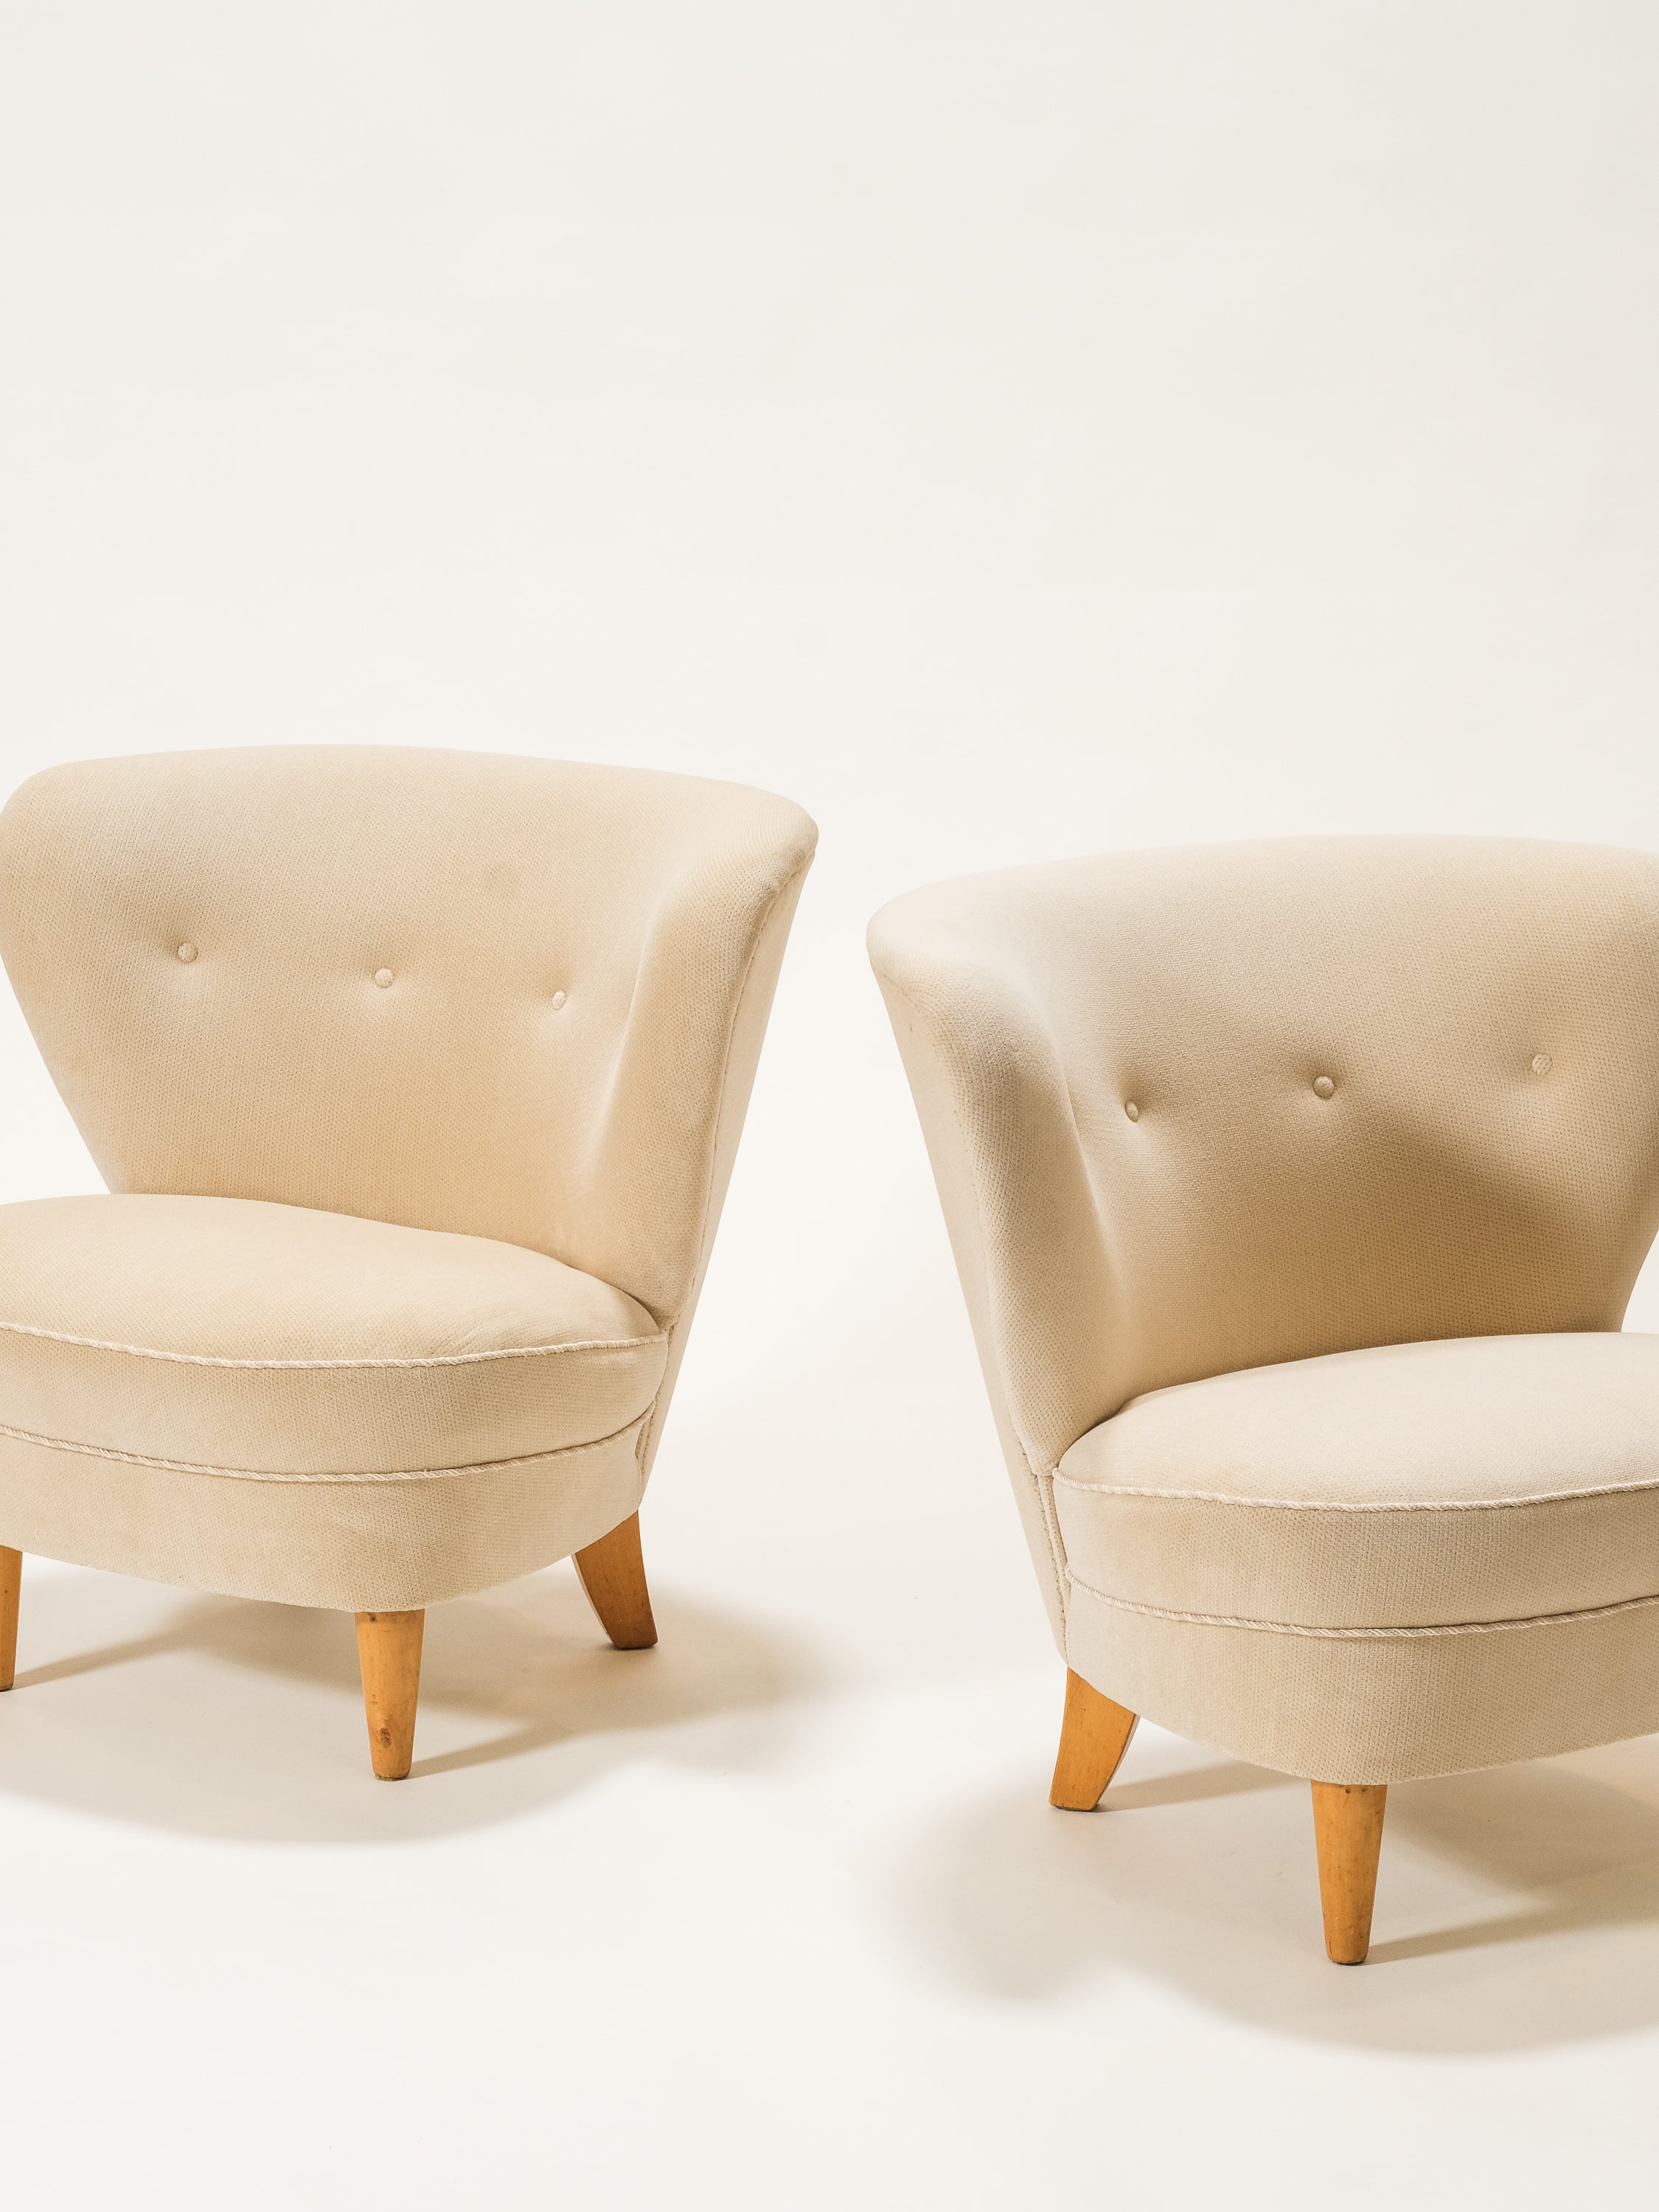 Pair of Mid-Century Finnish Easy Chairs